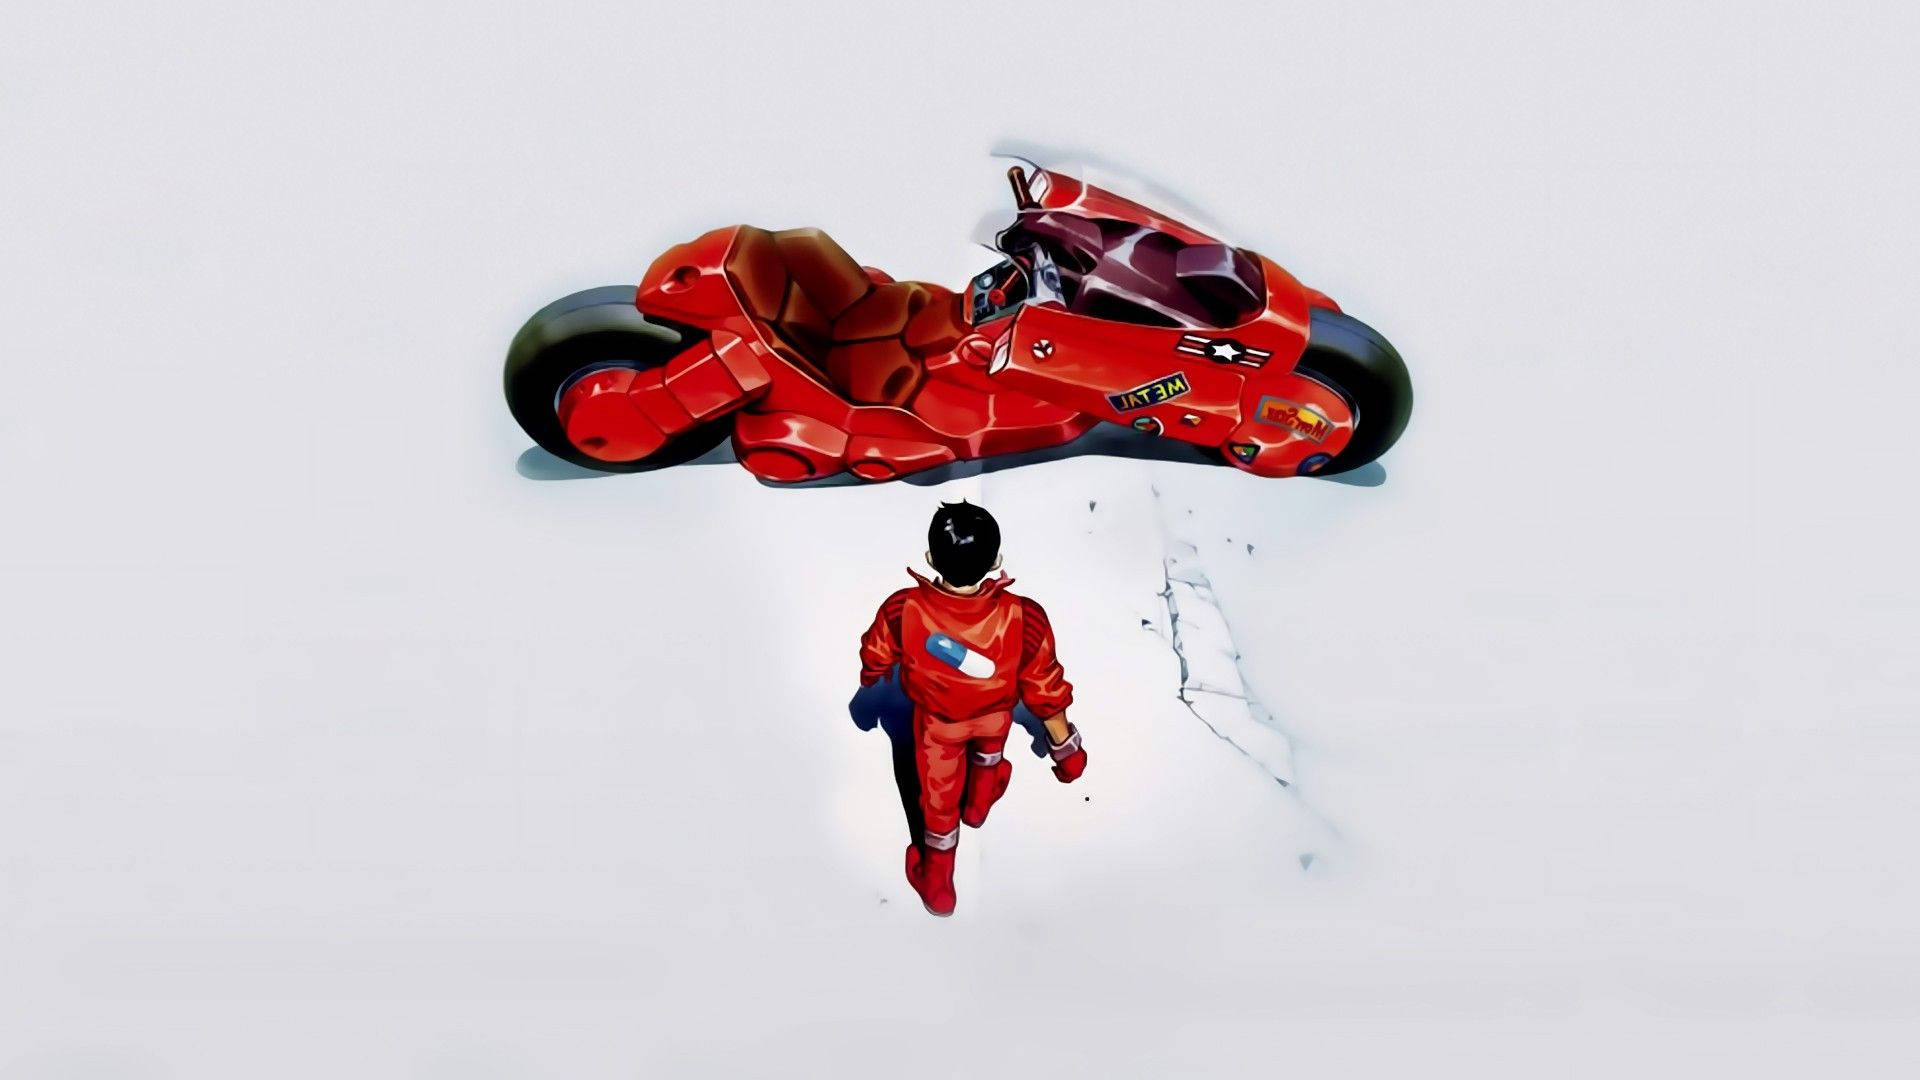 Inspired by Akira, an Aerial View of a Motorcycle Race Wallpaper